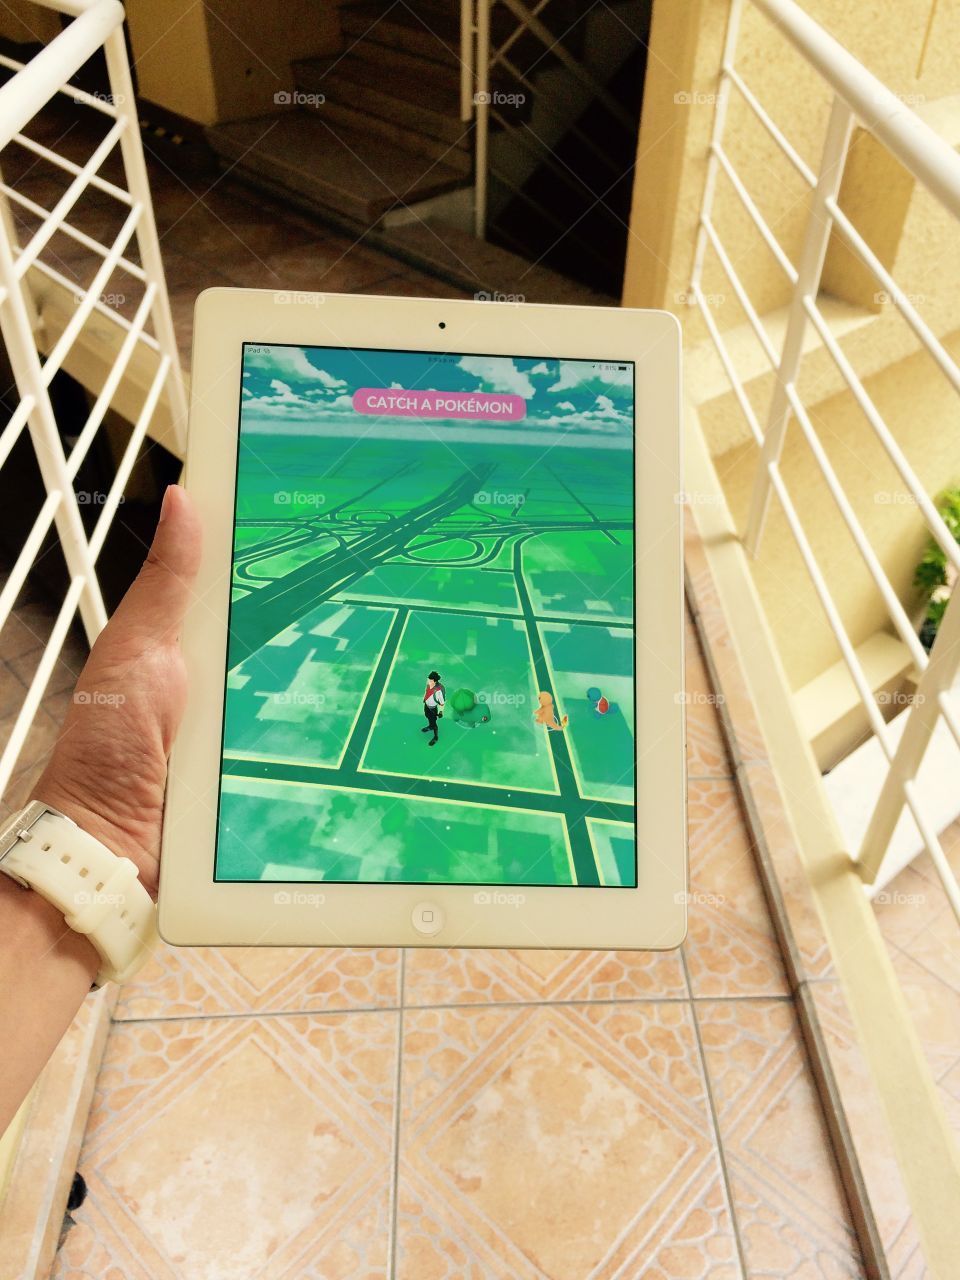 Playing Pokémon Go at Mexico City with an iPad 